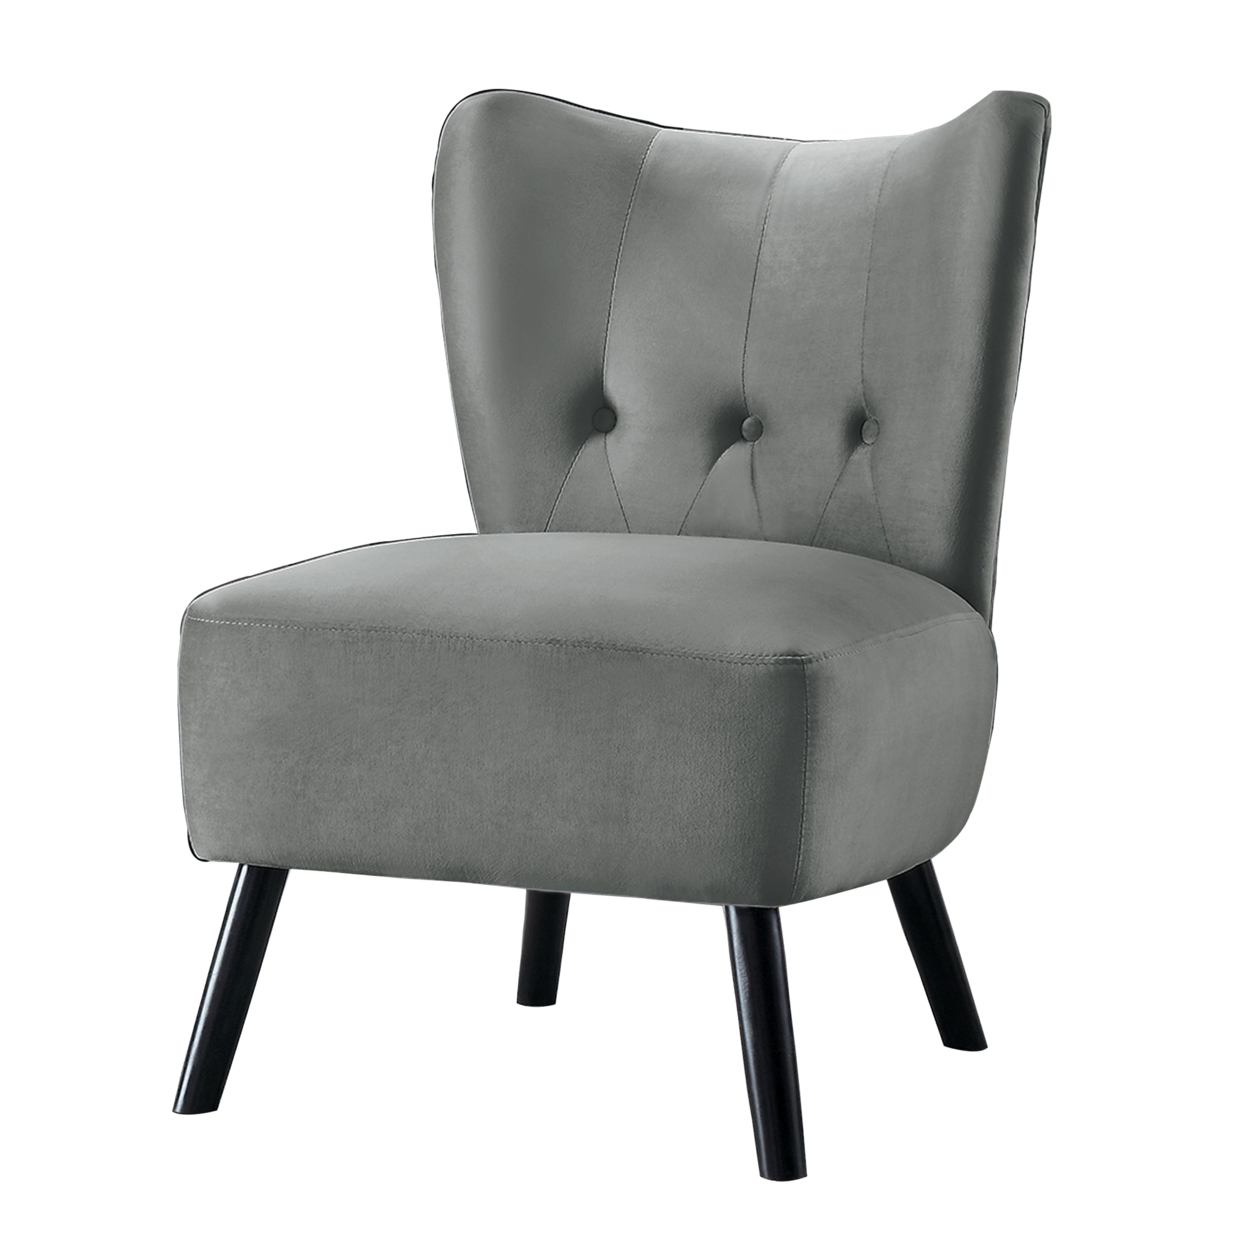 Upholstered Armless Accent Chair With Flared Back And Button Tufting, Gray- Saltoro Sherpi